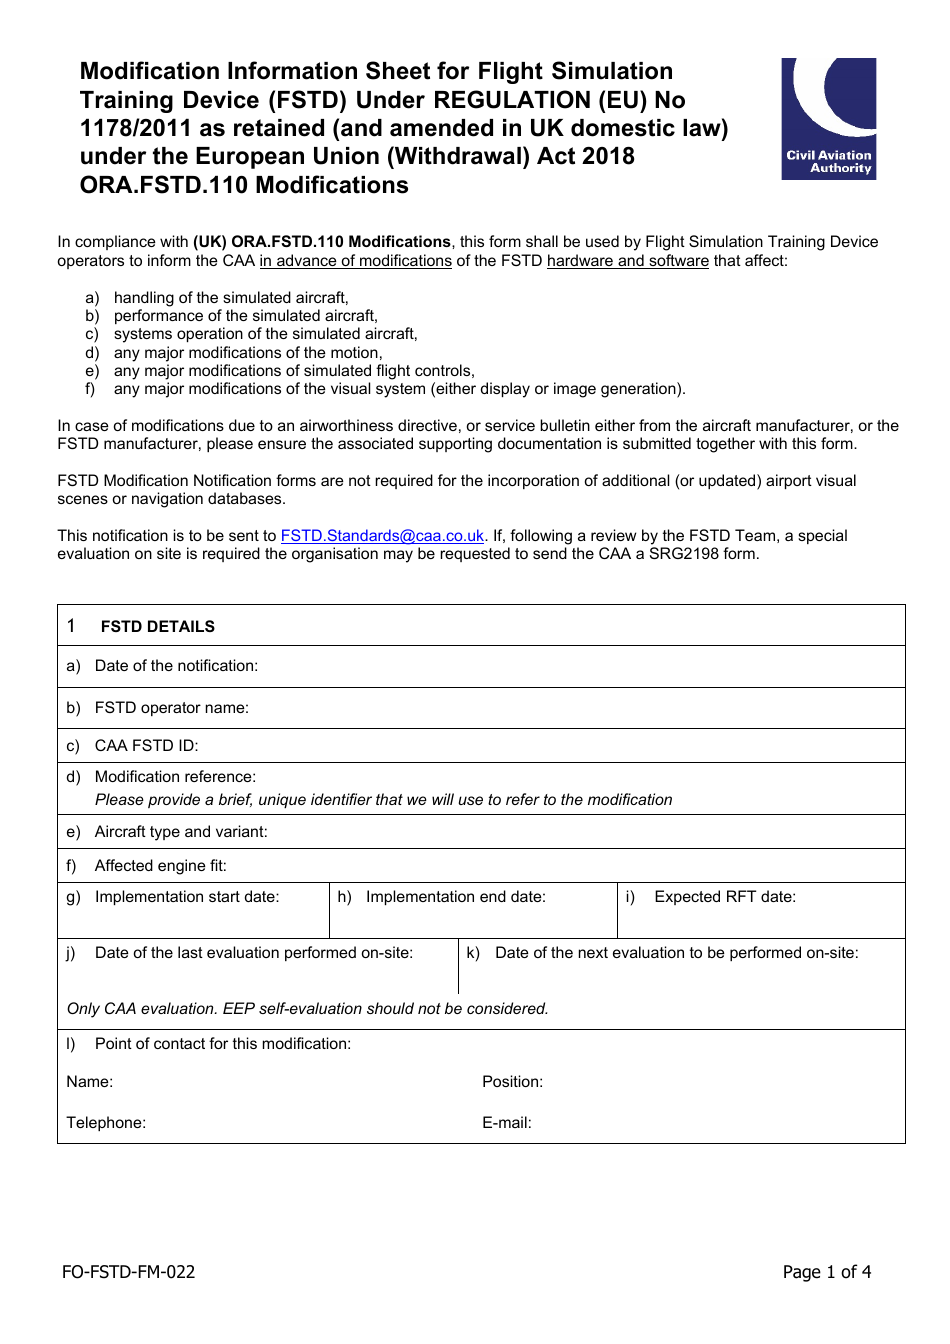 Form SRG2022 Modification Information Sheet for Flight Simulation Training Device (Fstd) Under Regulation (Eu) No 1178 / 2011 as Retained (And Amended in UK Domestic Law) Under the European Union (Withdrawal) Act 2018 Ora.fstd.110 Modifications - United Kingdom, Page 1